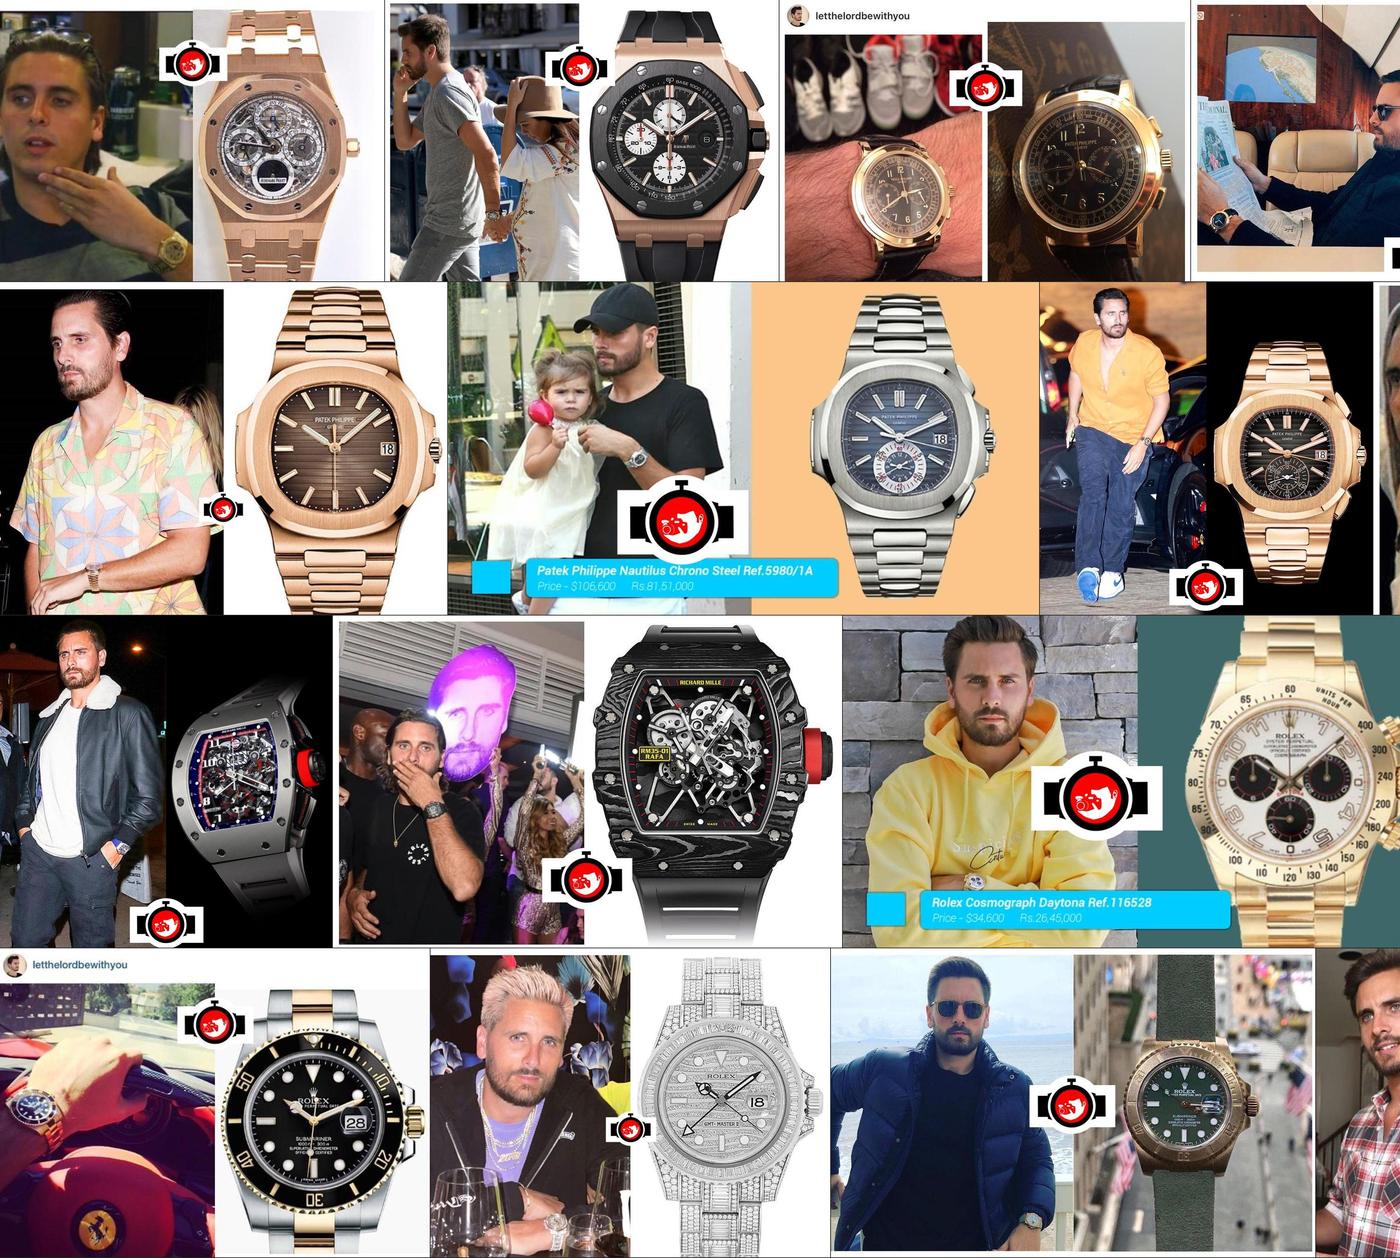 Lord Scott Disick's Impressive Watch Collection: Unpacking the Luxury Brands